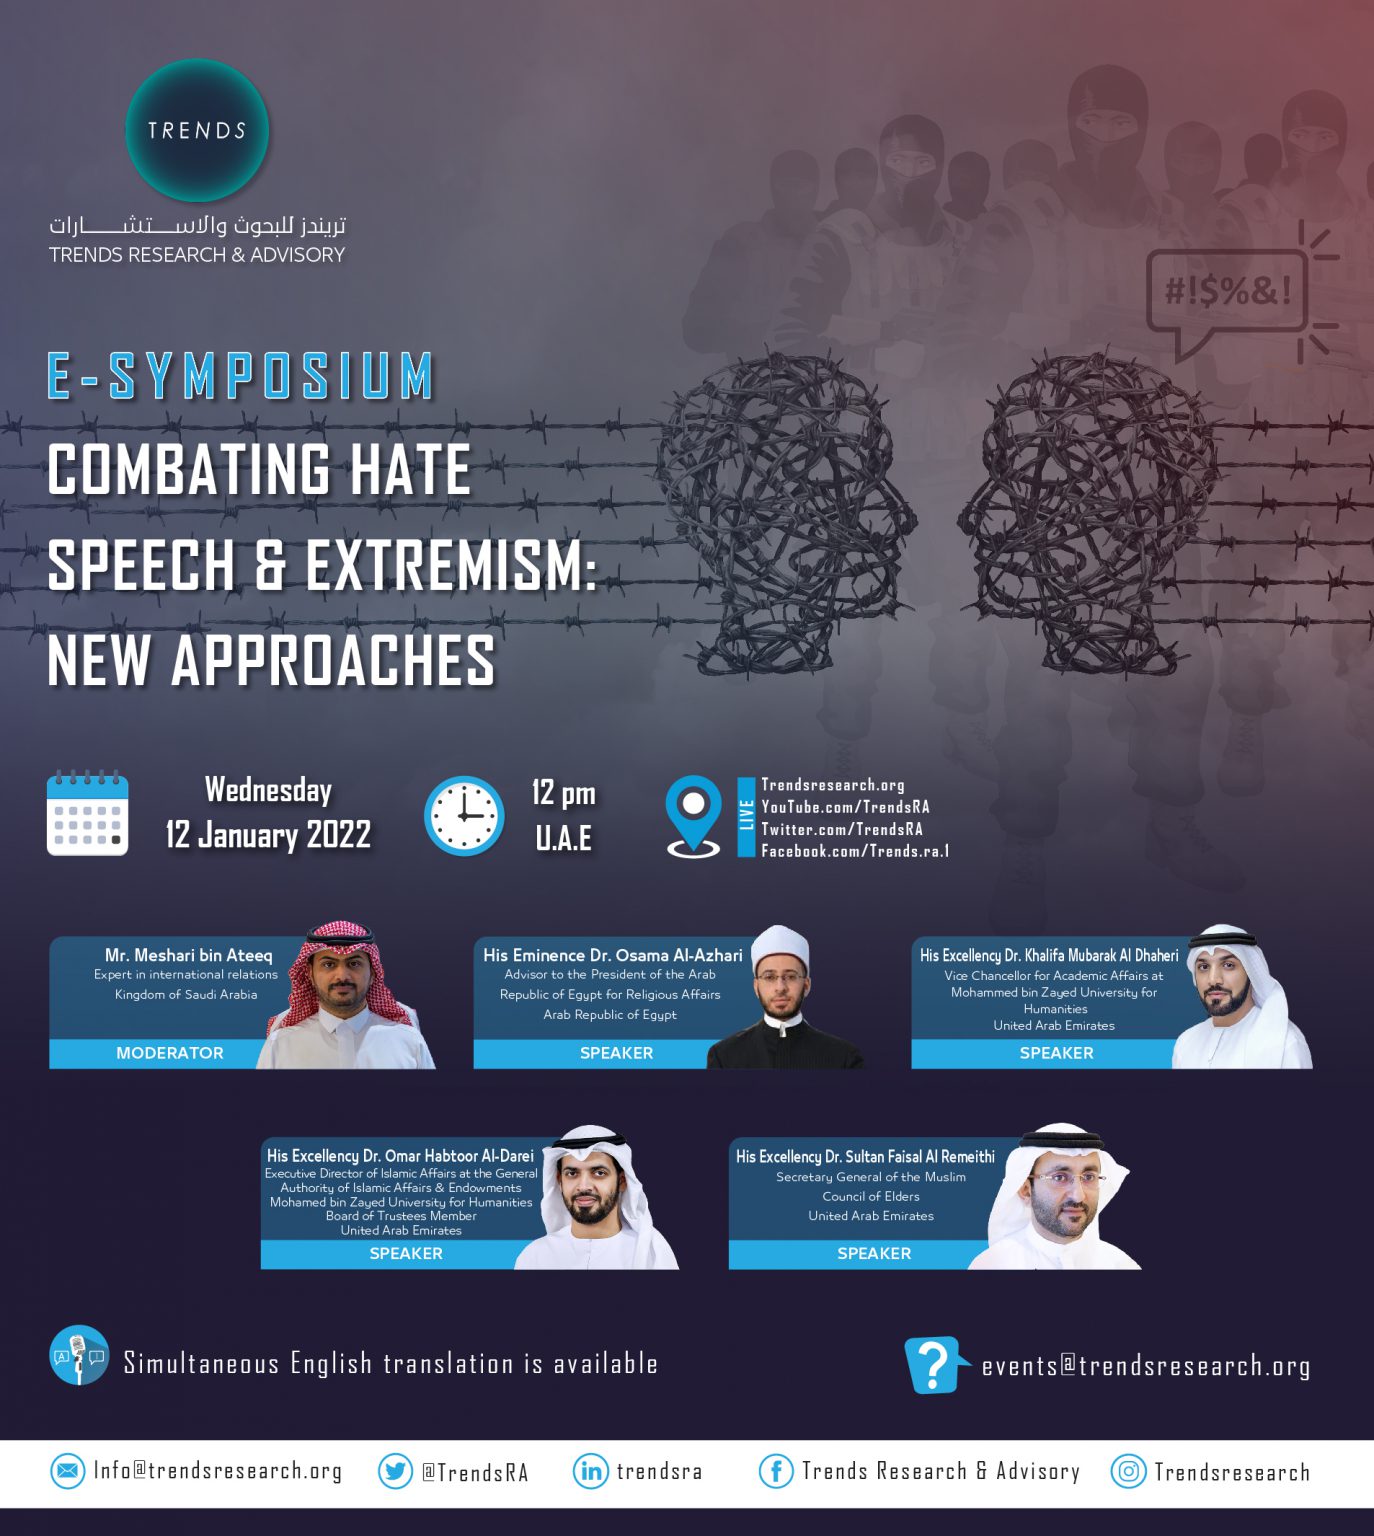 Combating Hate Speech & Extremism: New Approaches